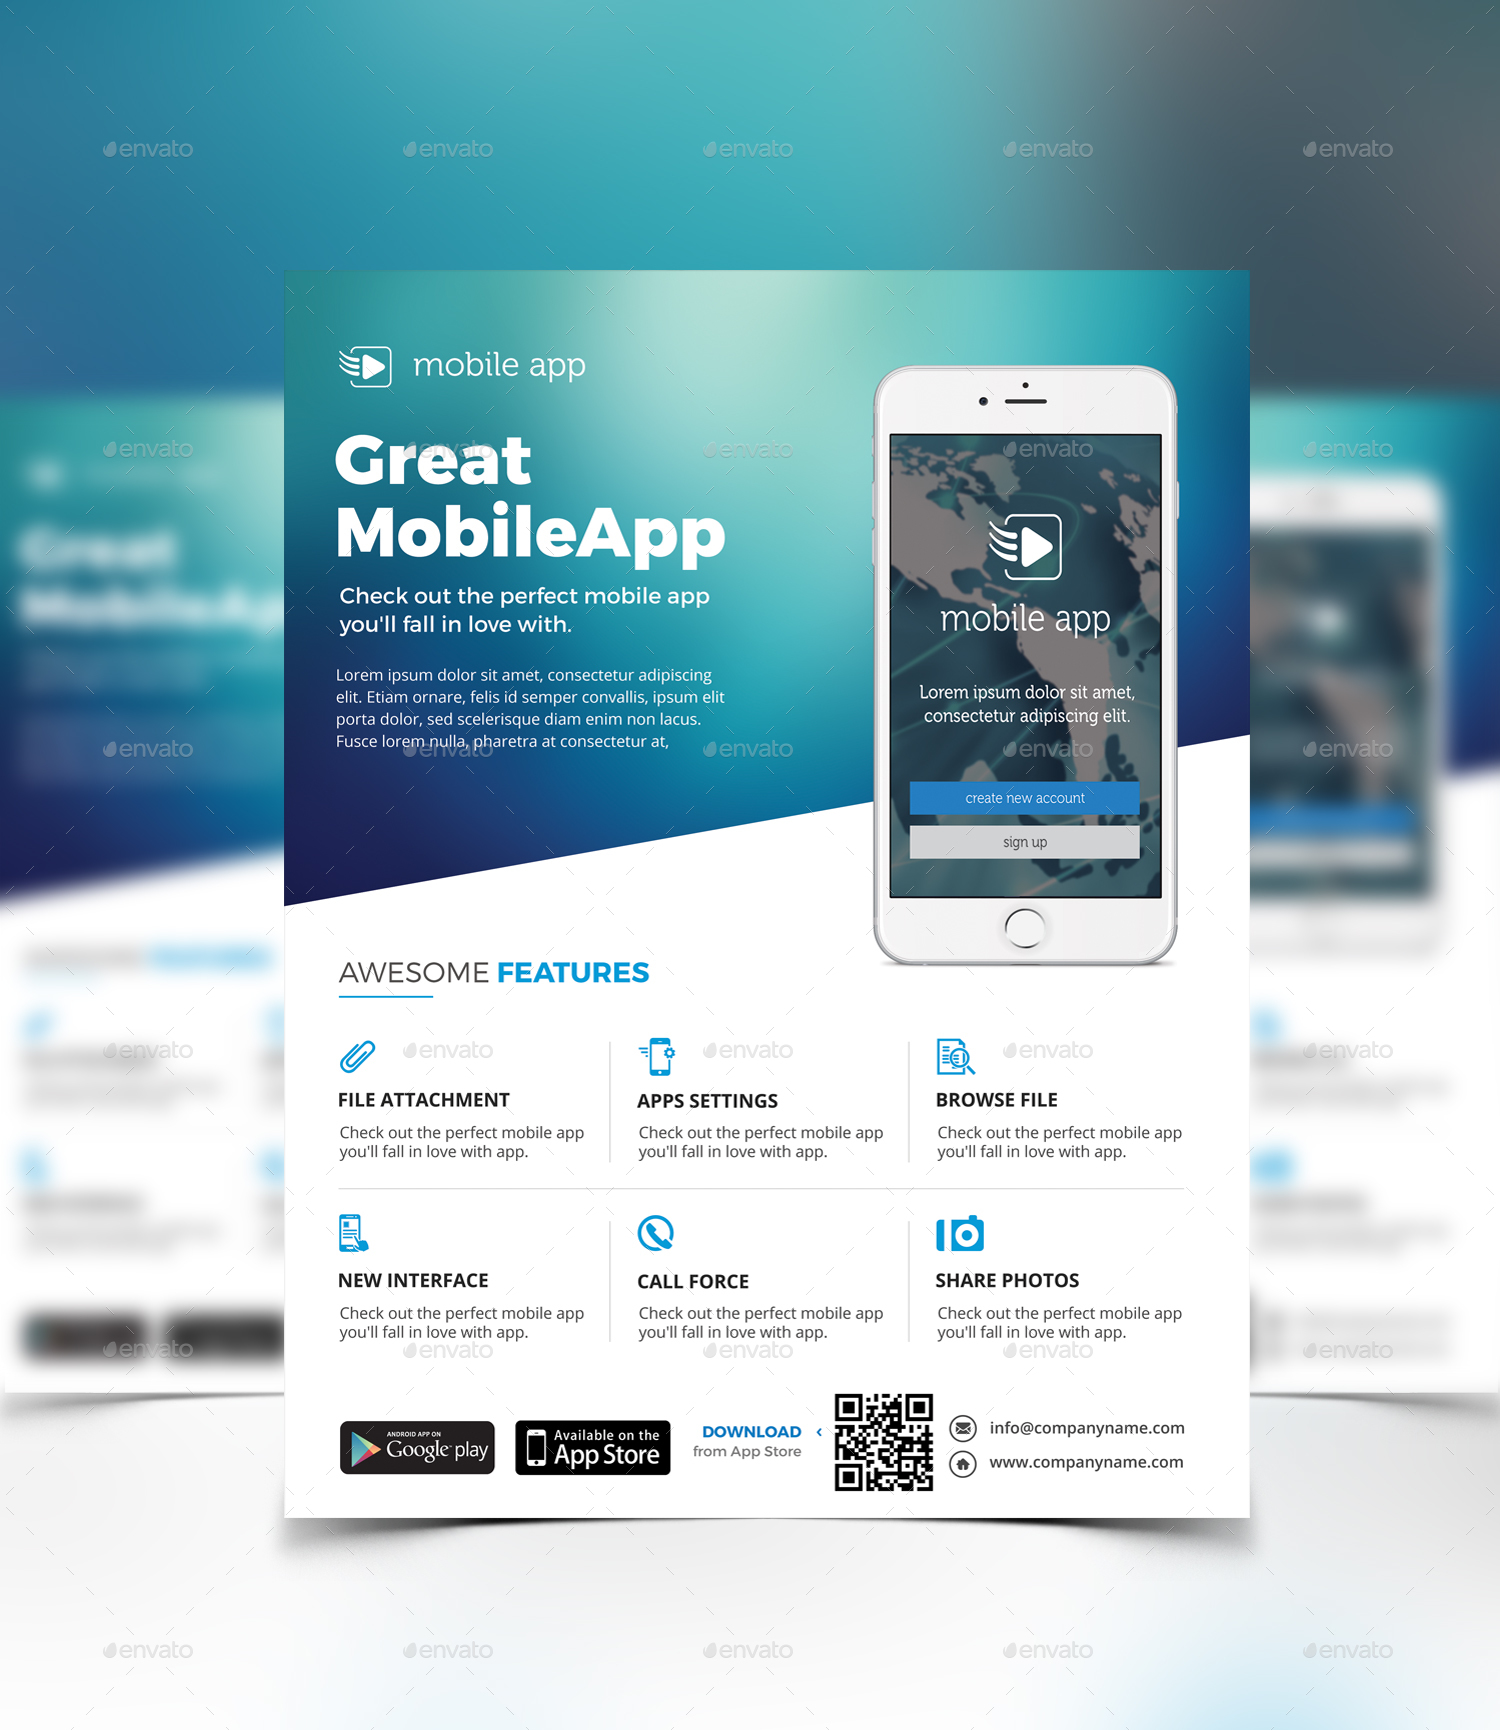 Mobile Apps Flyer by DesignsTemplate | GraphicRiver